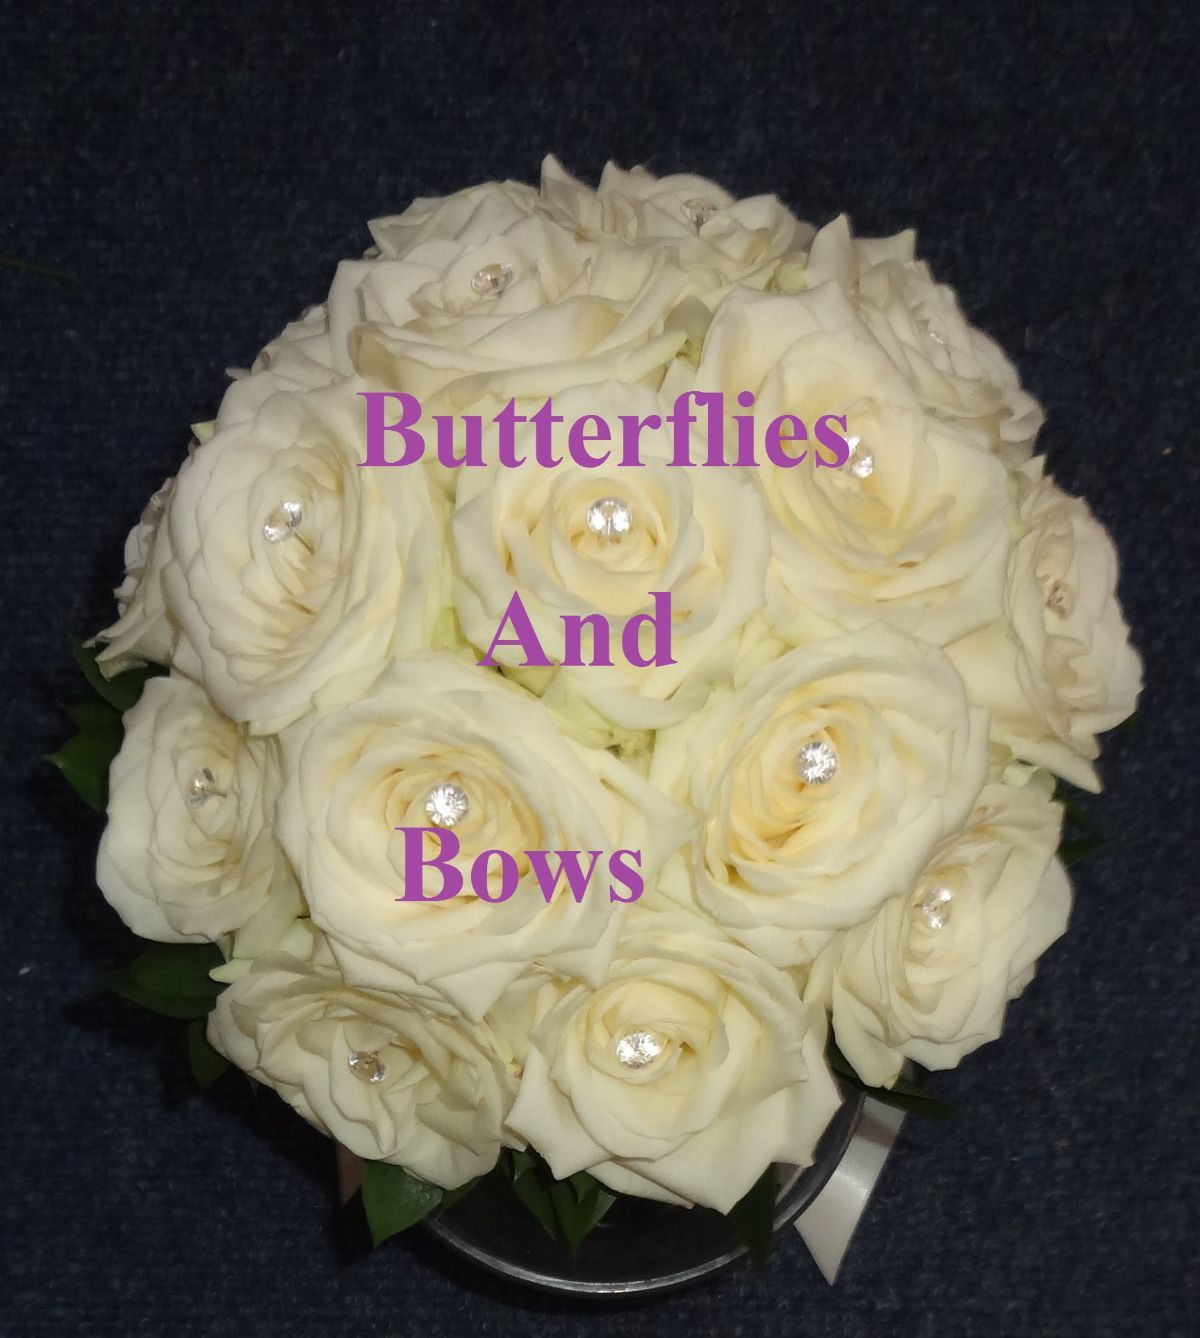 Butterflies And Bows-Image-265